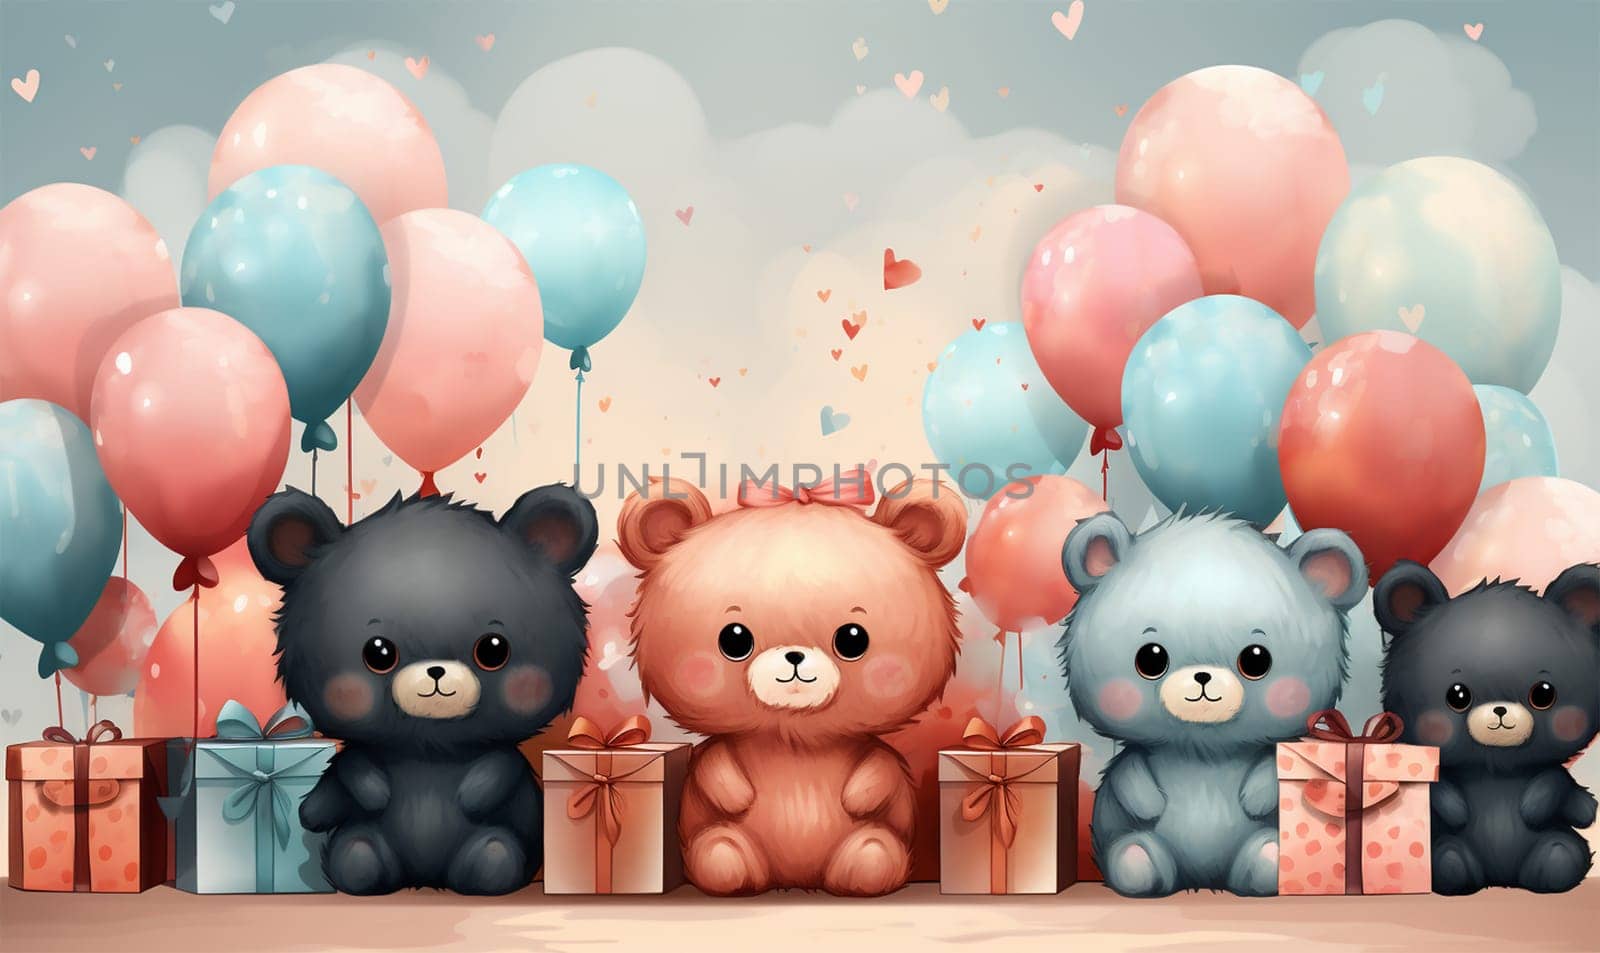 Cute birthday card. Happy birthday greeting card and party invitation. Colored illustration. Balloons,present,gift box and confetti. Adorable design for children by Annebel146